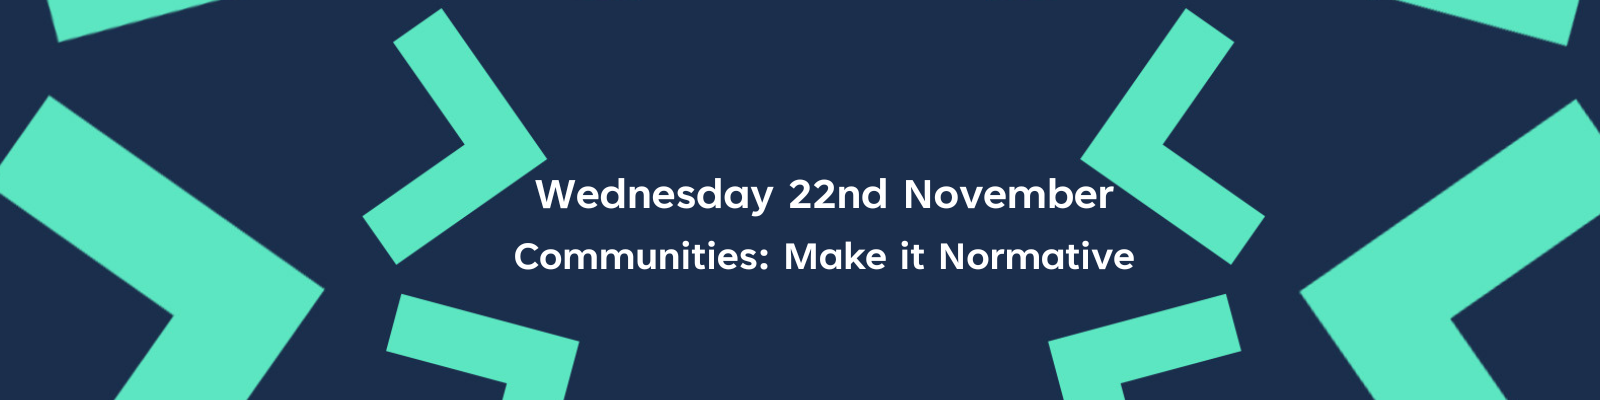 Wednesday 22nd November: Communities - Make it Normative